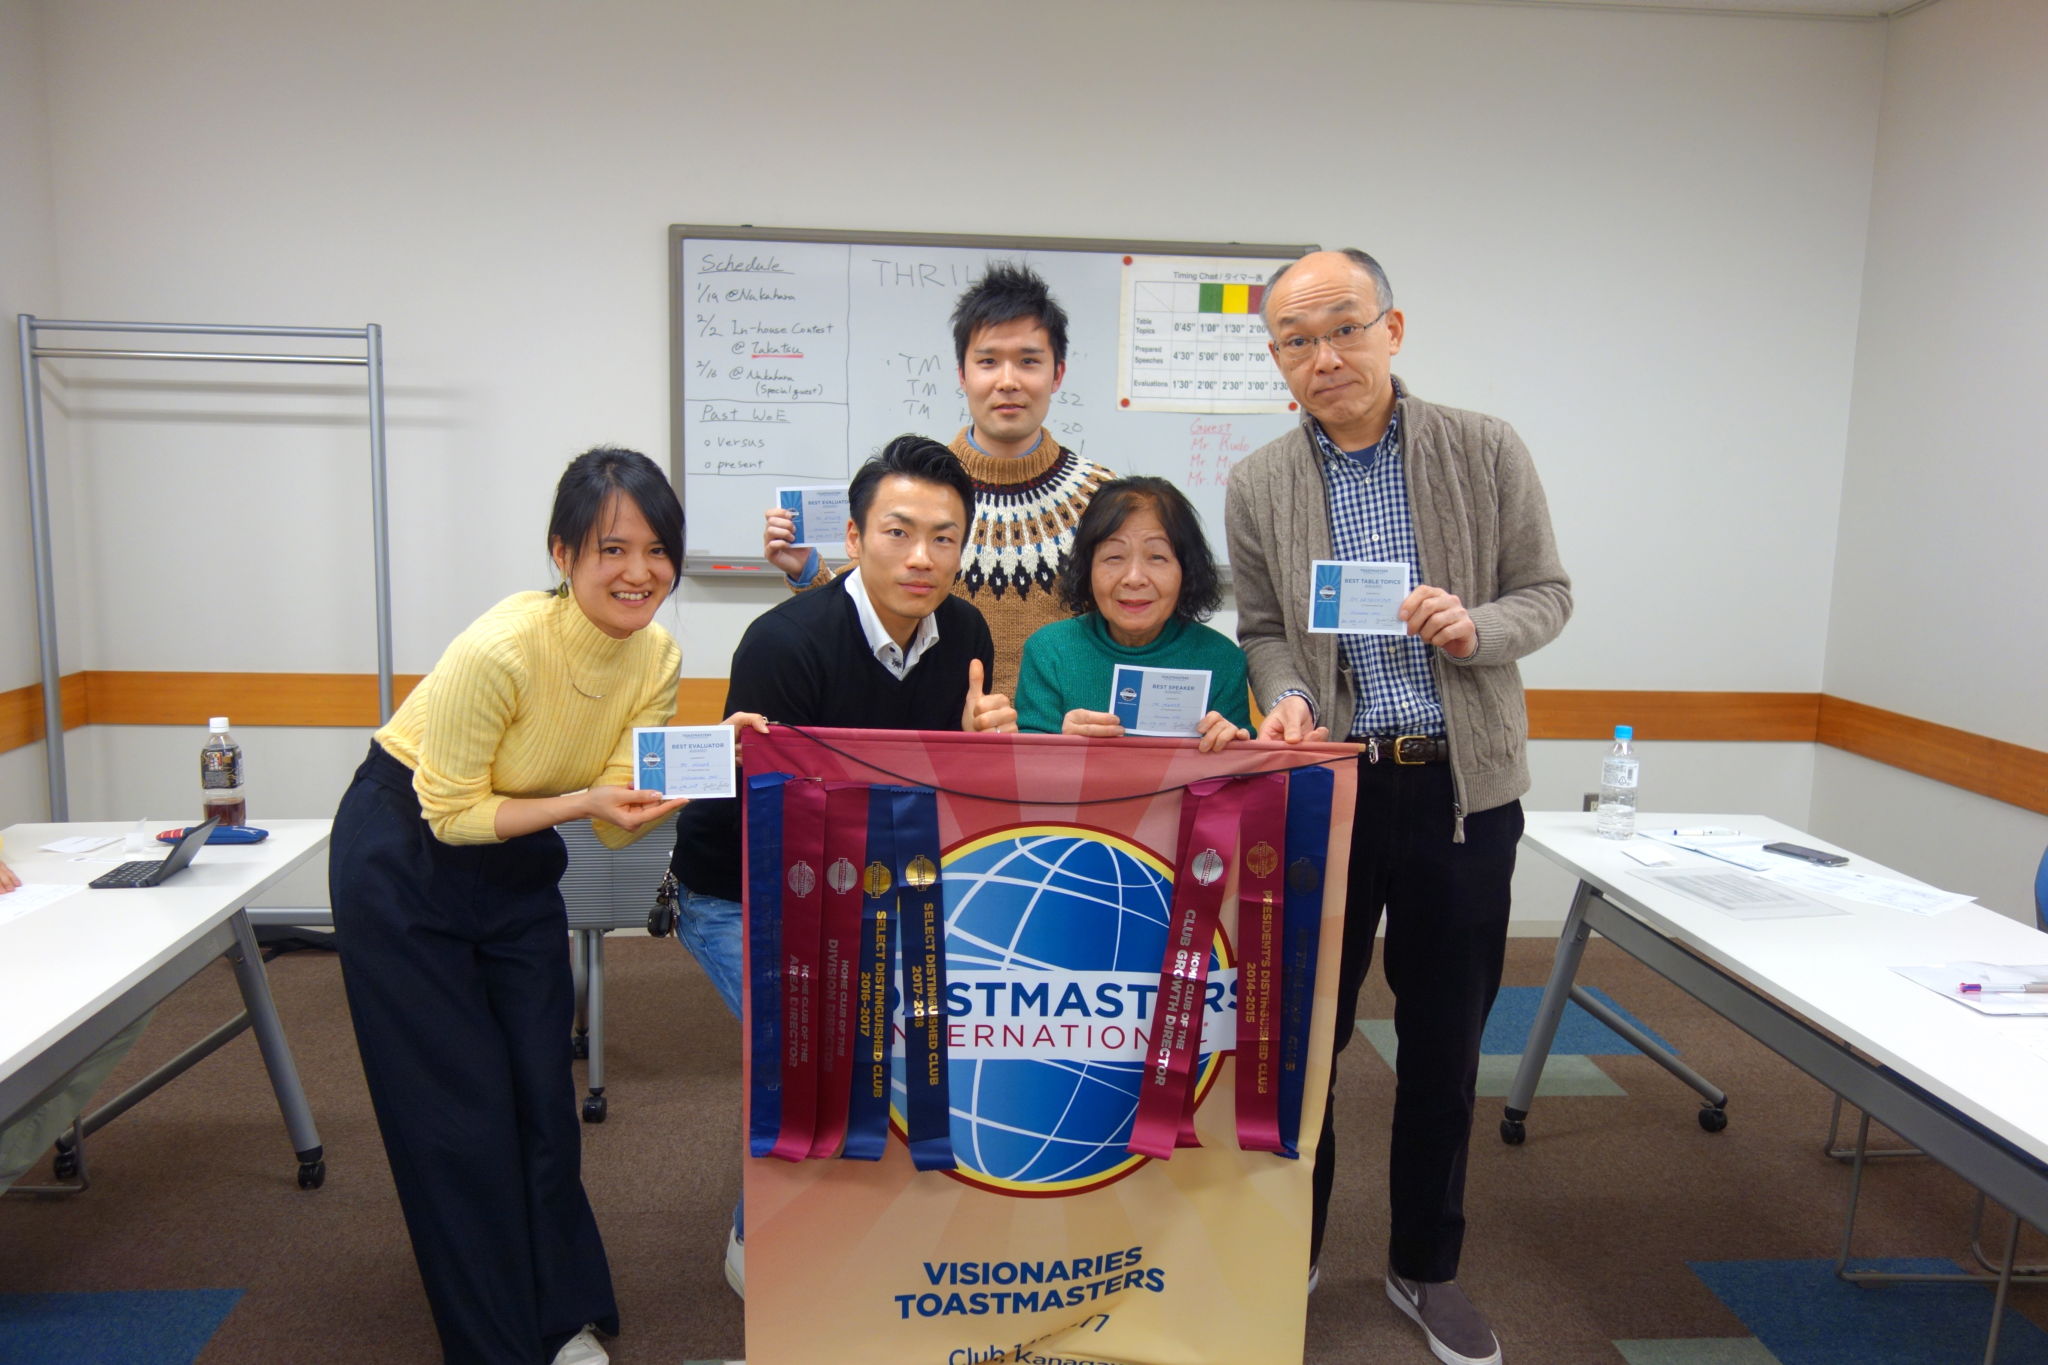 Visionaries Toastmasters Club #209 meeting reward session picture